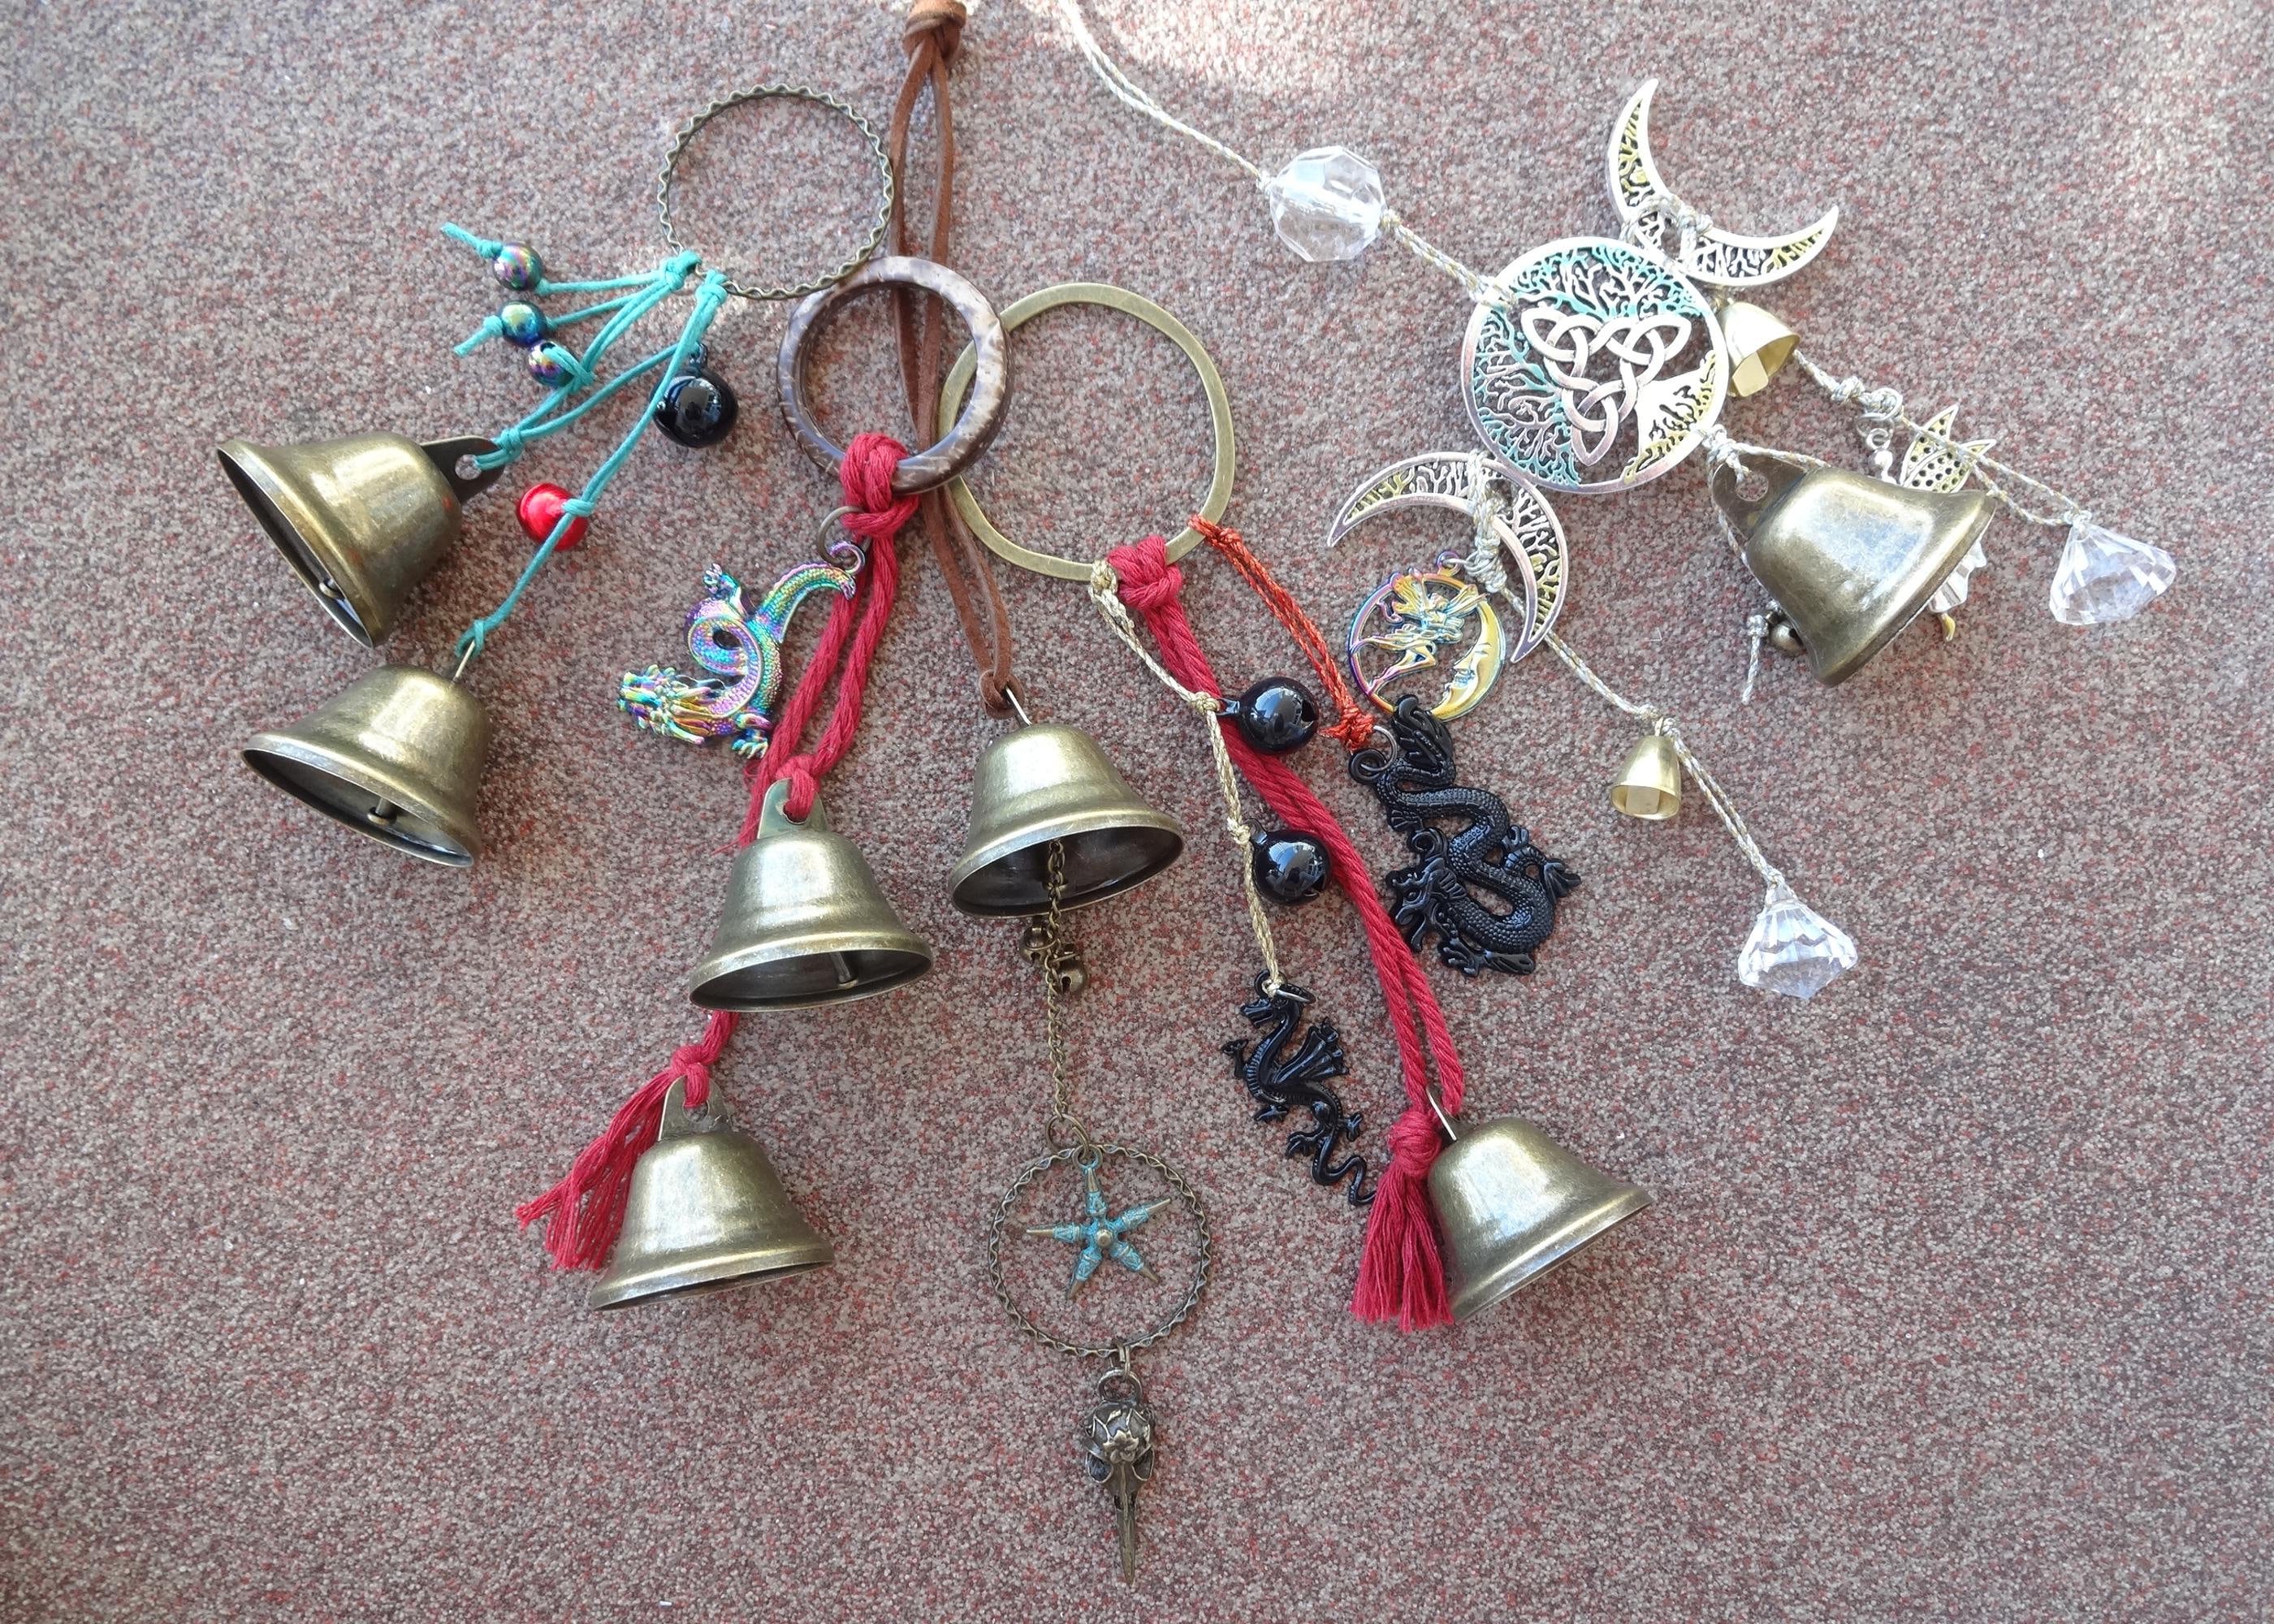 Rustic Witch Bells for Door, Home Protection Talisman, Primitive Witch's  Bells, Housewarming Gift for Witch, Witchcraft Decor 